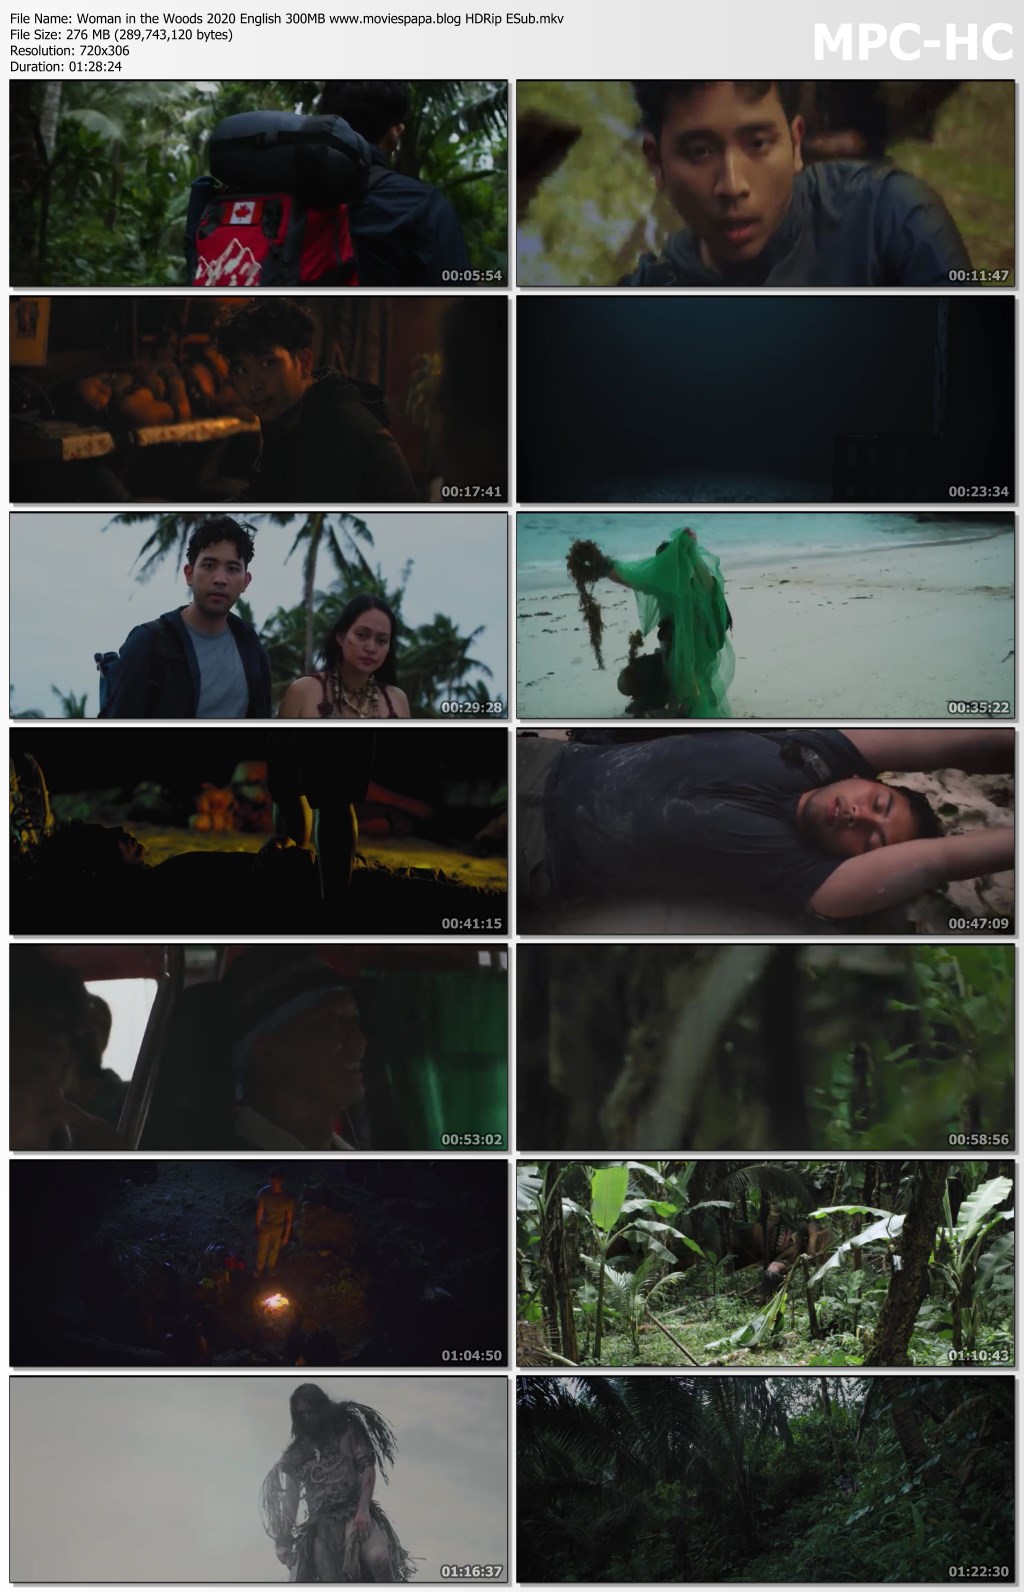 Woman In The Woods English 300mb Hdrip Esub Download